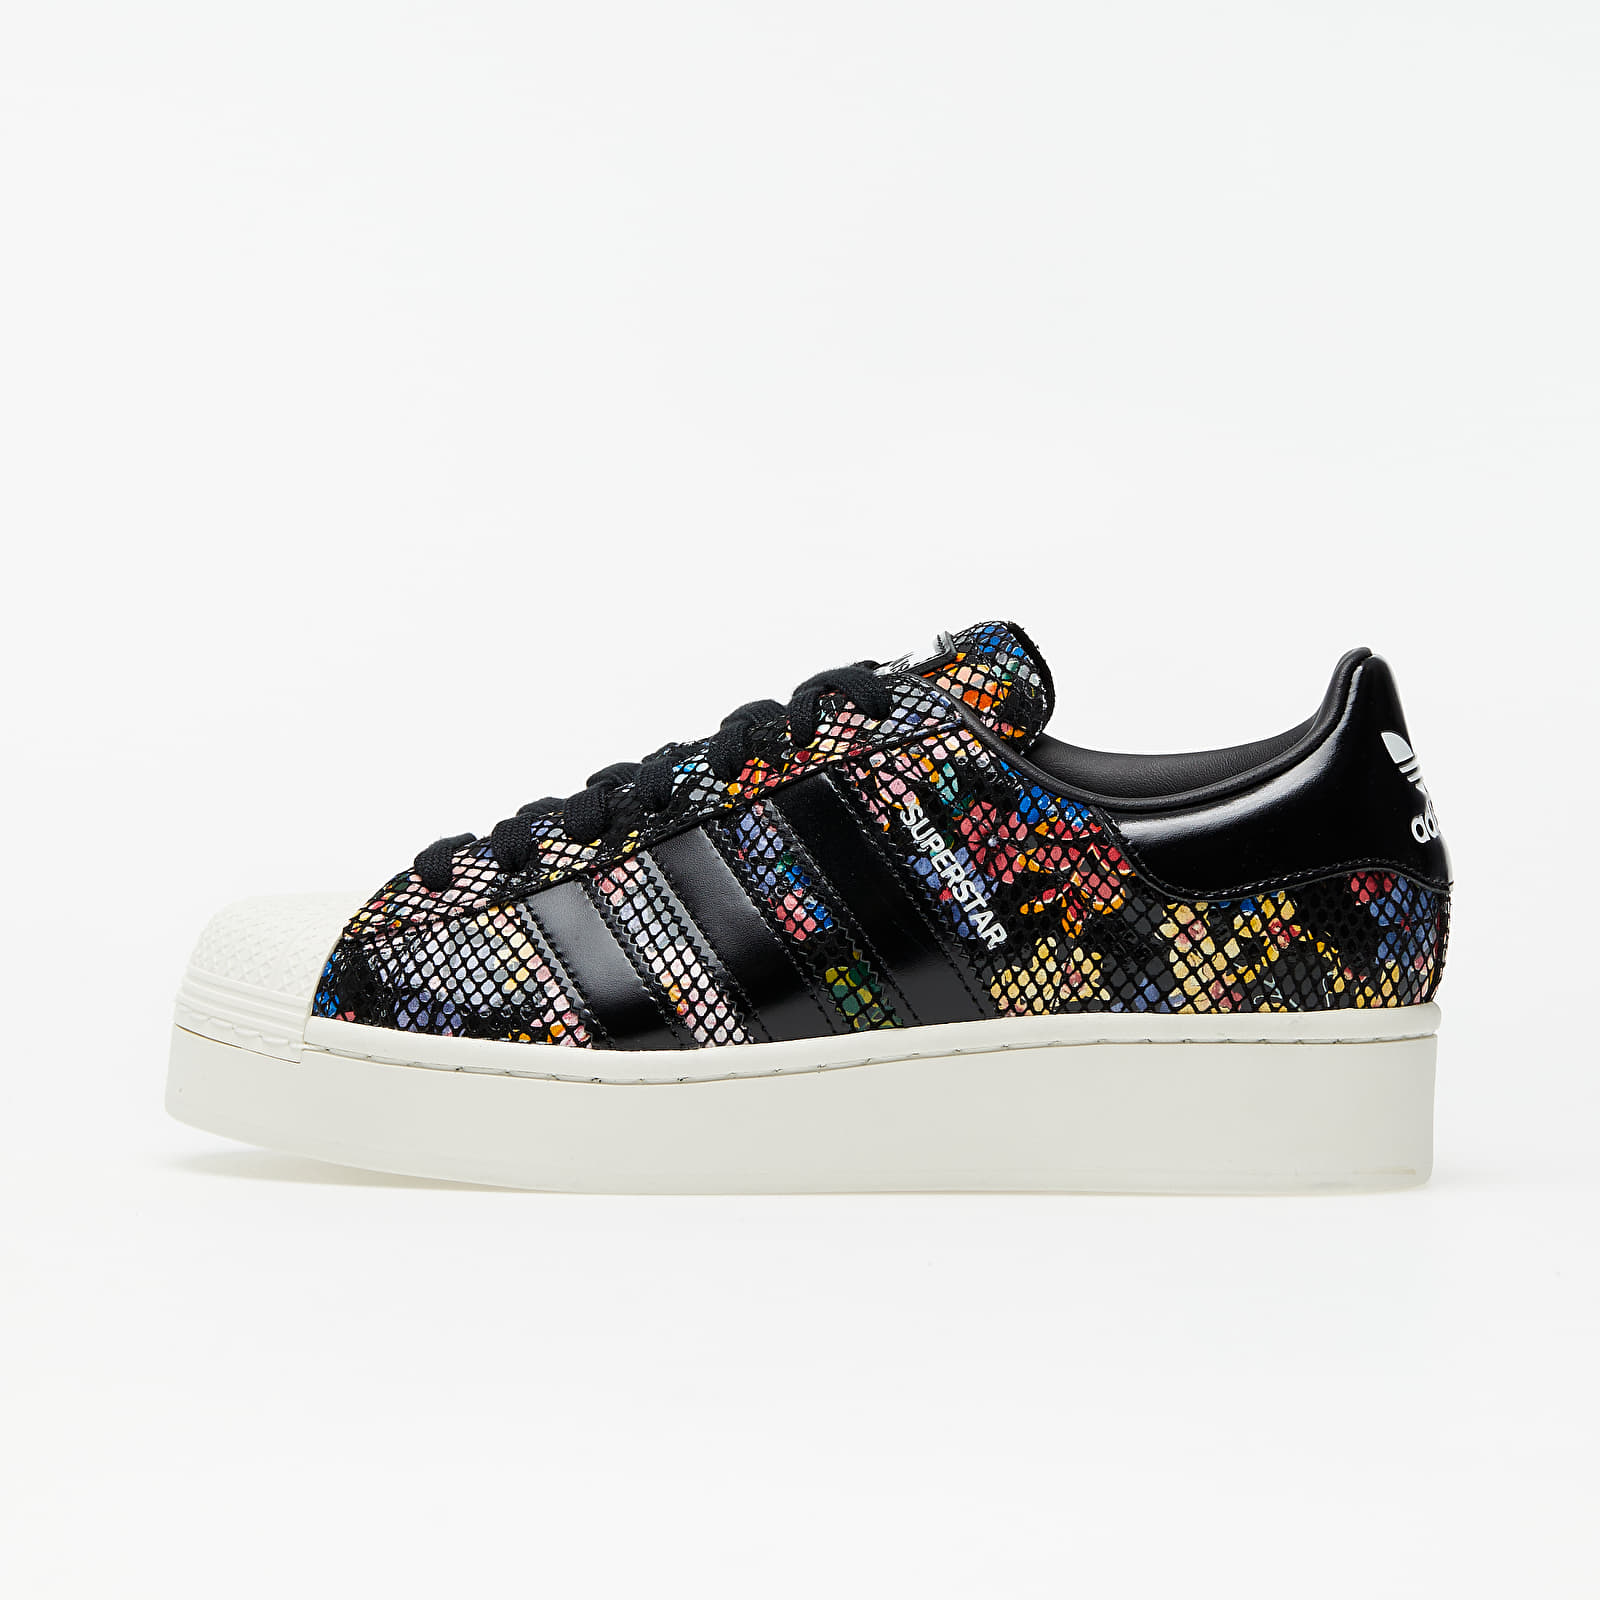 adidas Superstar Bold W Core Black/ Off White/ Red 59158